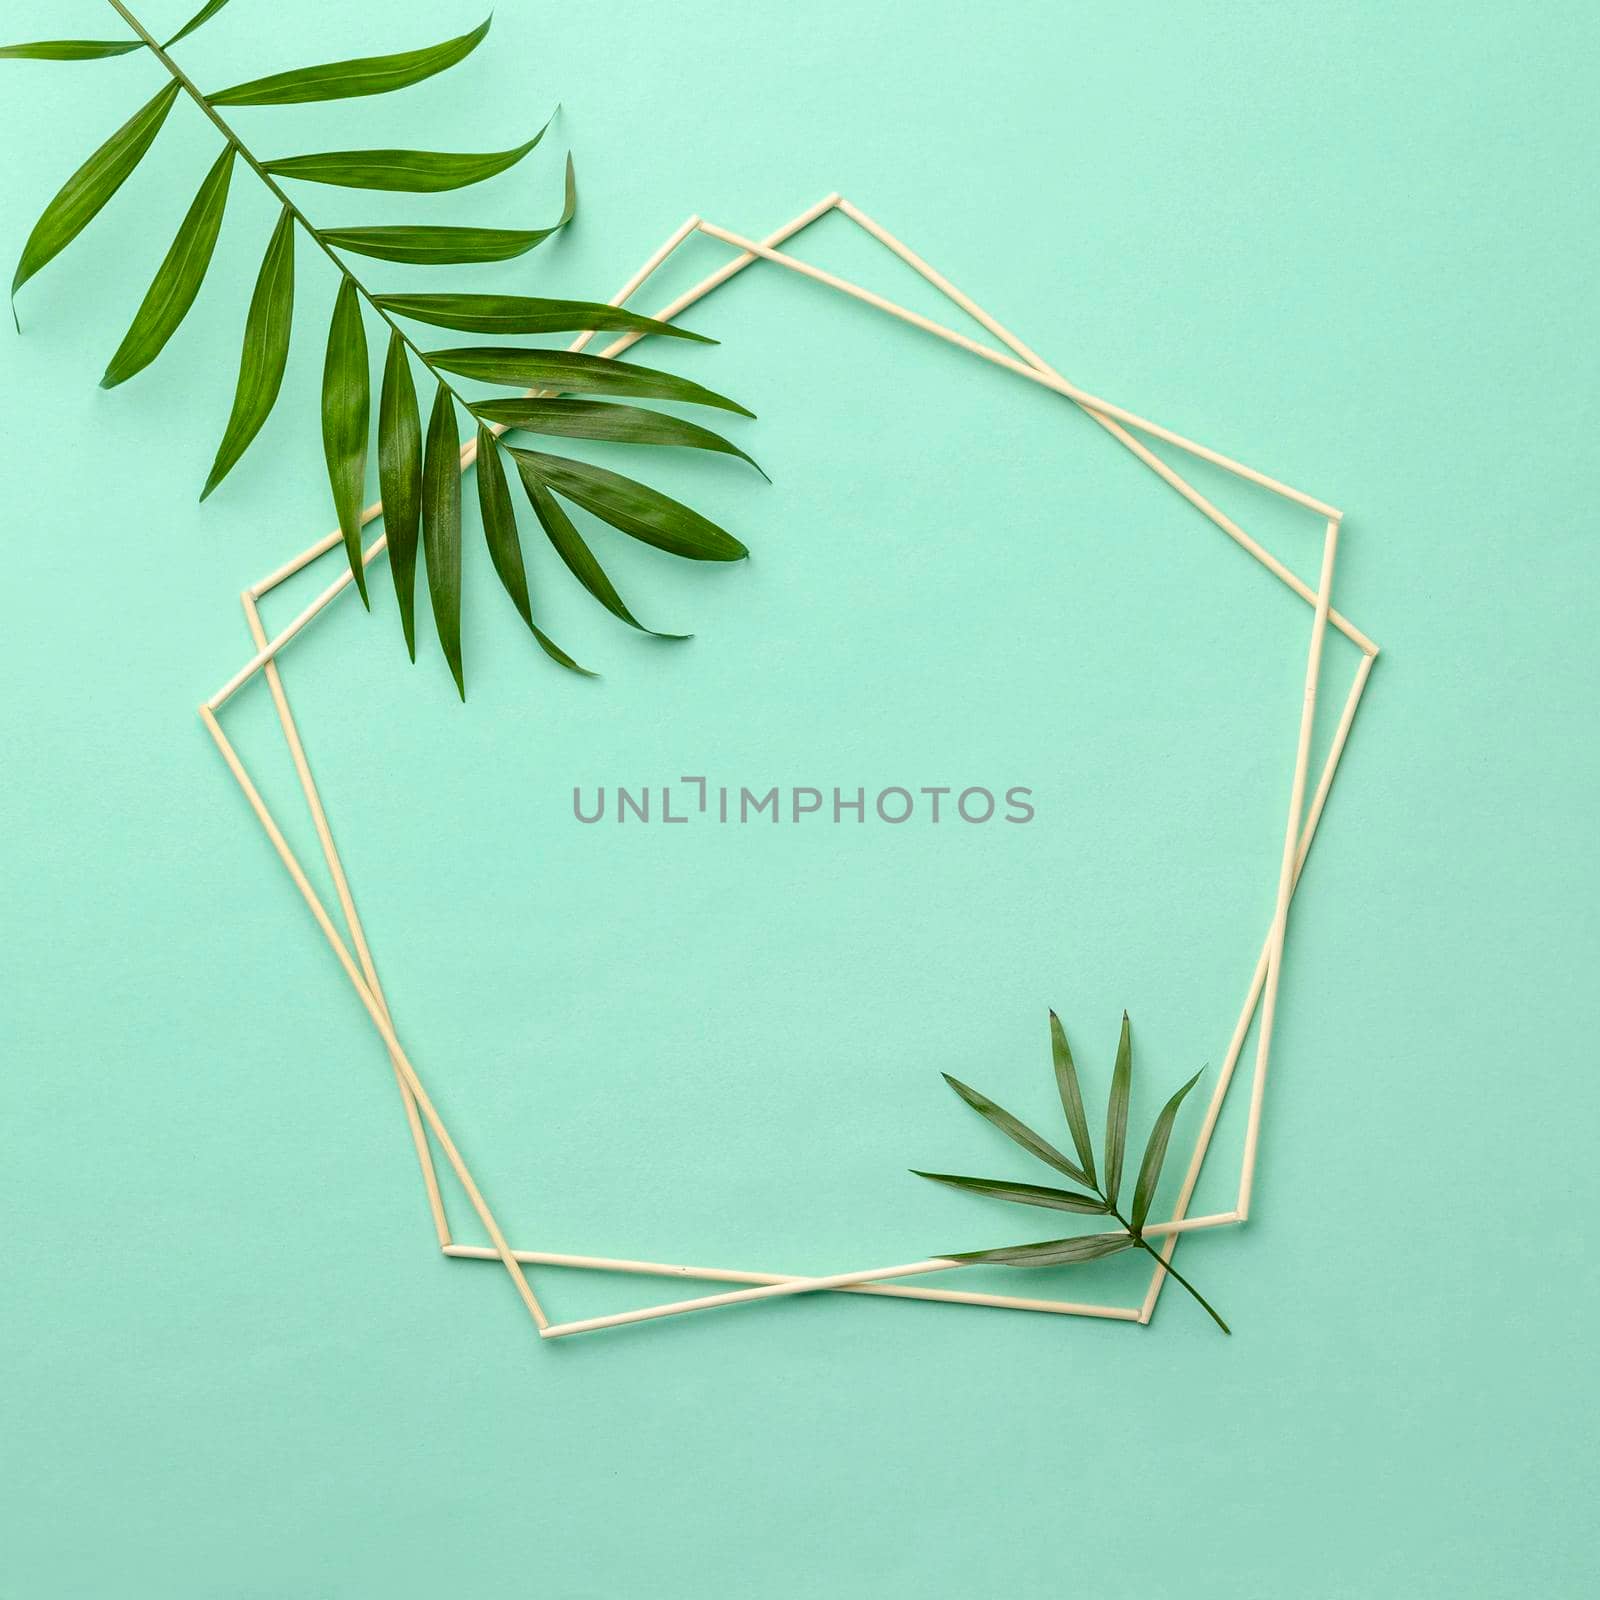 assortment green leaves with empty frame. High quality photo by Zahard